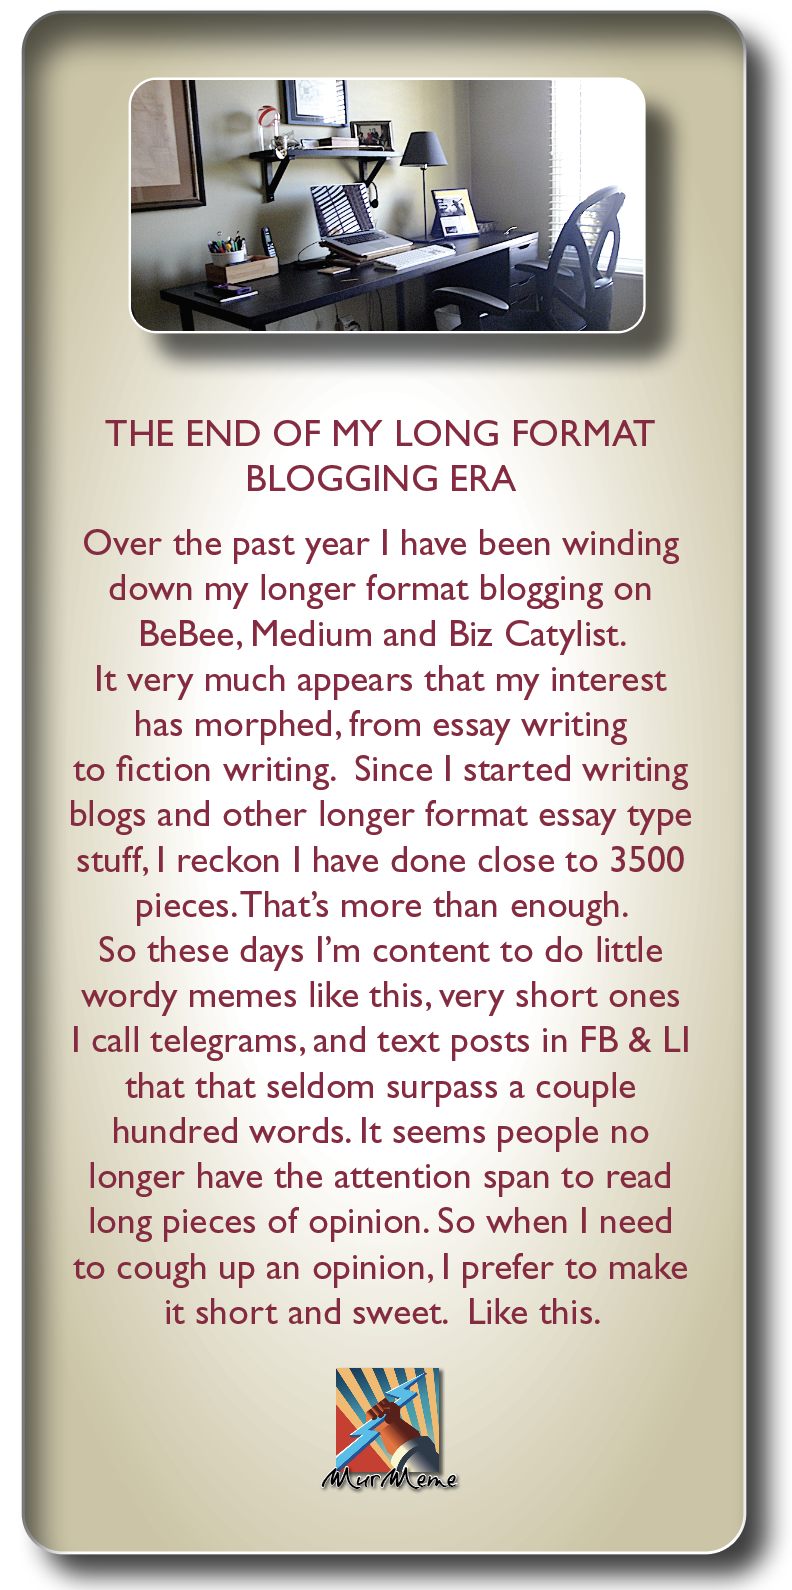 THE END OF MY LONG FORMAT
BLOGGING ERA

Over the past year | have been winding
down my longer format blogging on
BeBee, Medium and Biz Catylist.

It very much appears that my interest
has morphed, from essay writing
to fiction writing. Since | started writing
blogs and other longer format essay type
stuff, | reckon | have done close to 3500
pieces. That's more than enough.

So these days I'm content to do little
wordy memes like this, very short ones
| call telegrams, and text posts in FB & LI
that that seldom surpass a couple
hundred words. It seems people no
longer have the attention span to read
long pieces of opinion. So when | need
to cough up an opinion, | prefer to make
it short and sweet. Like this.

»